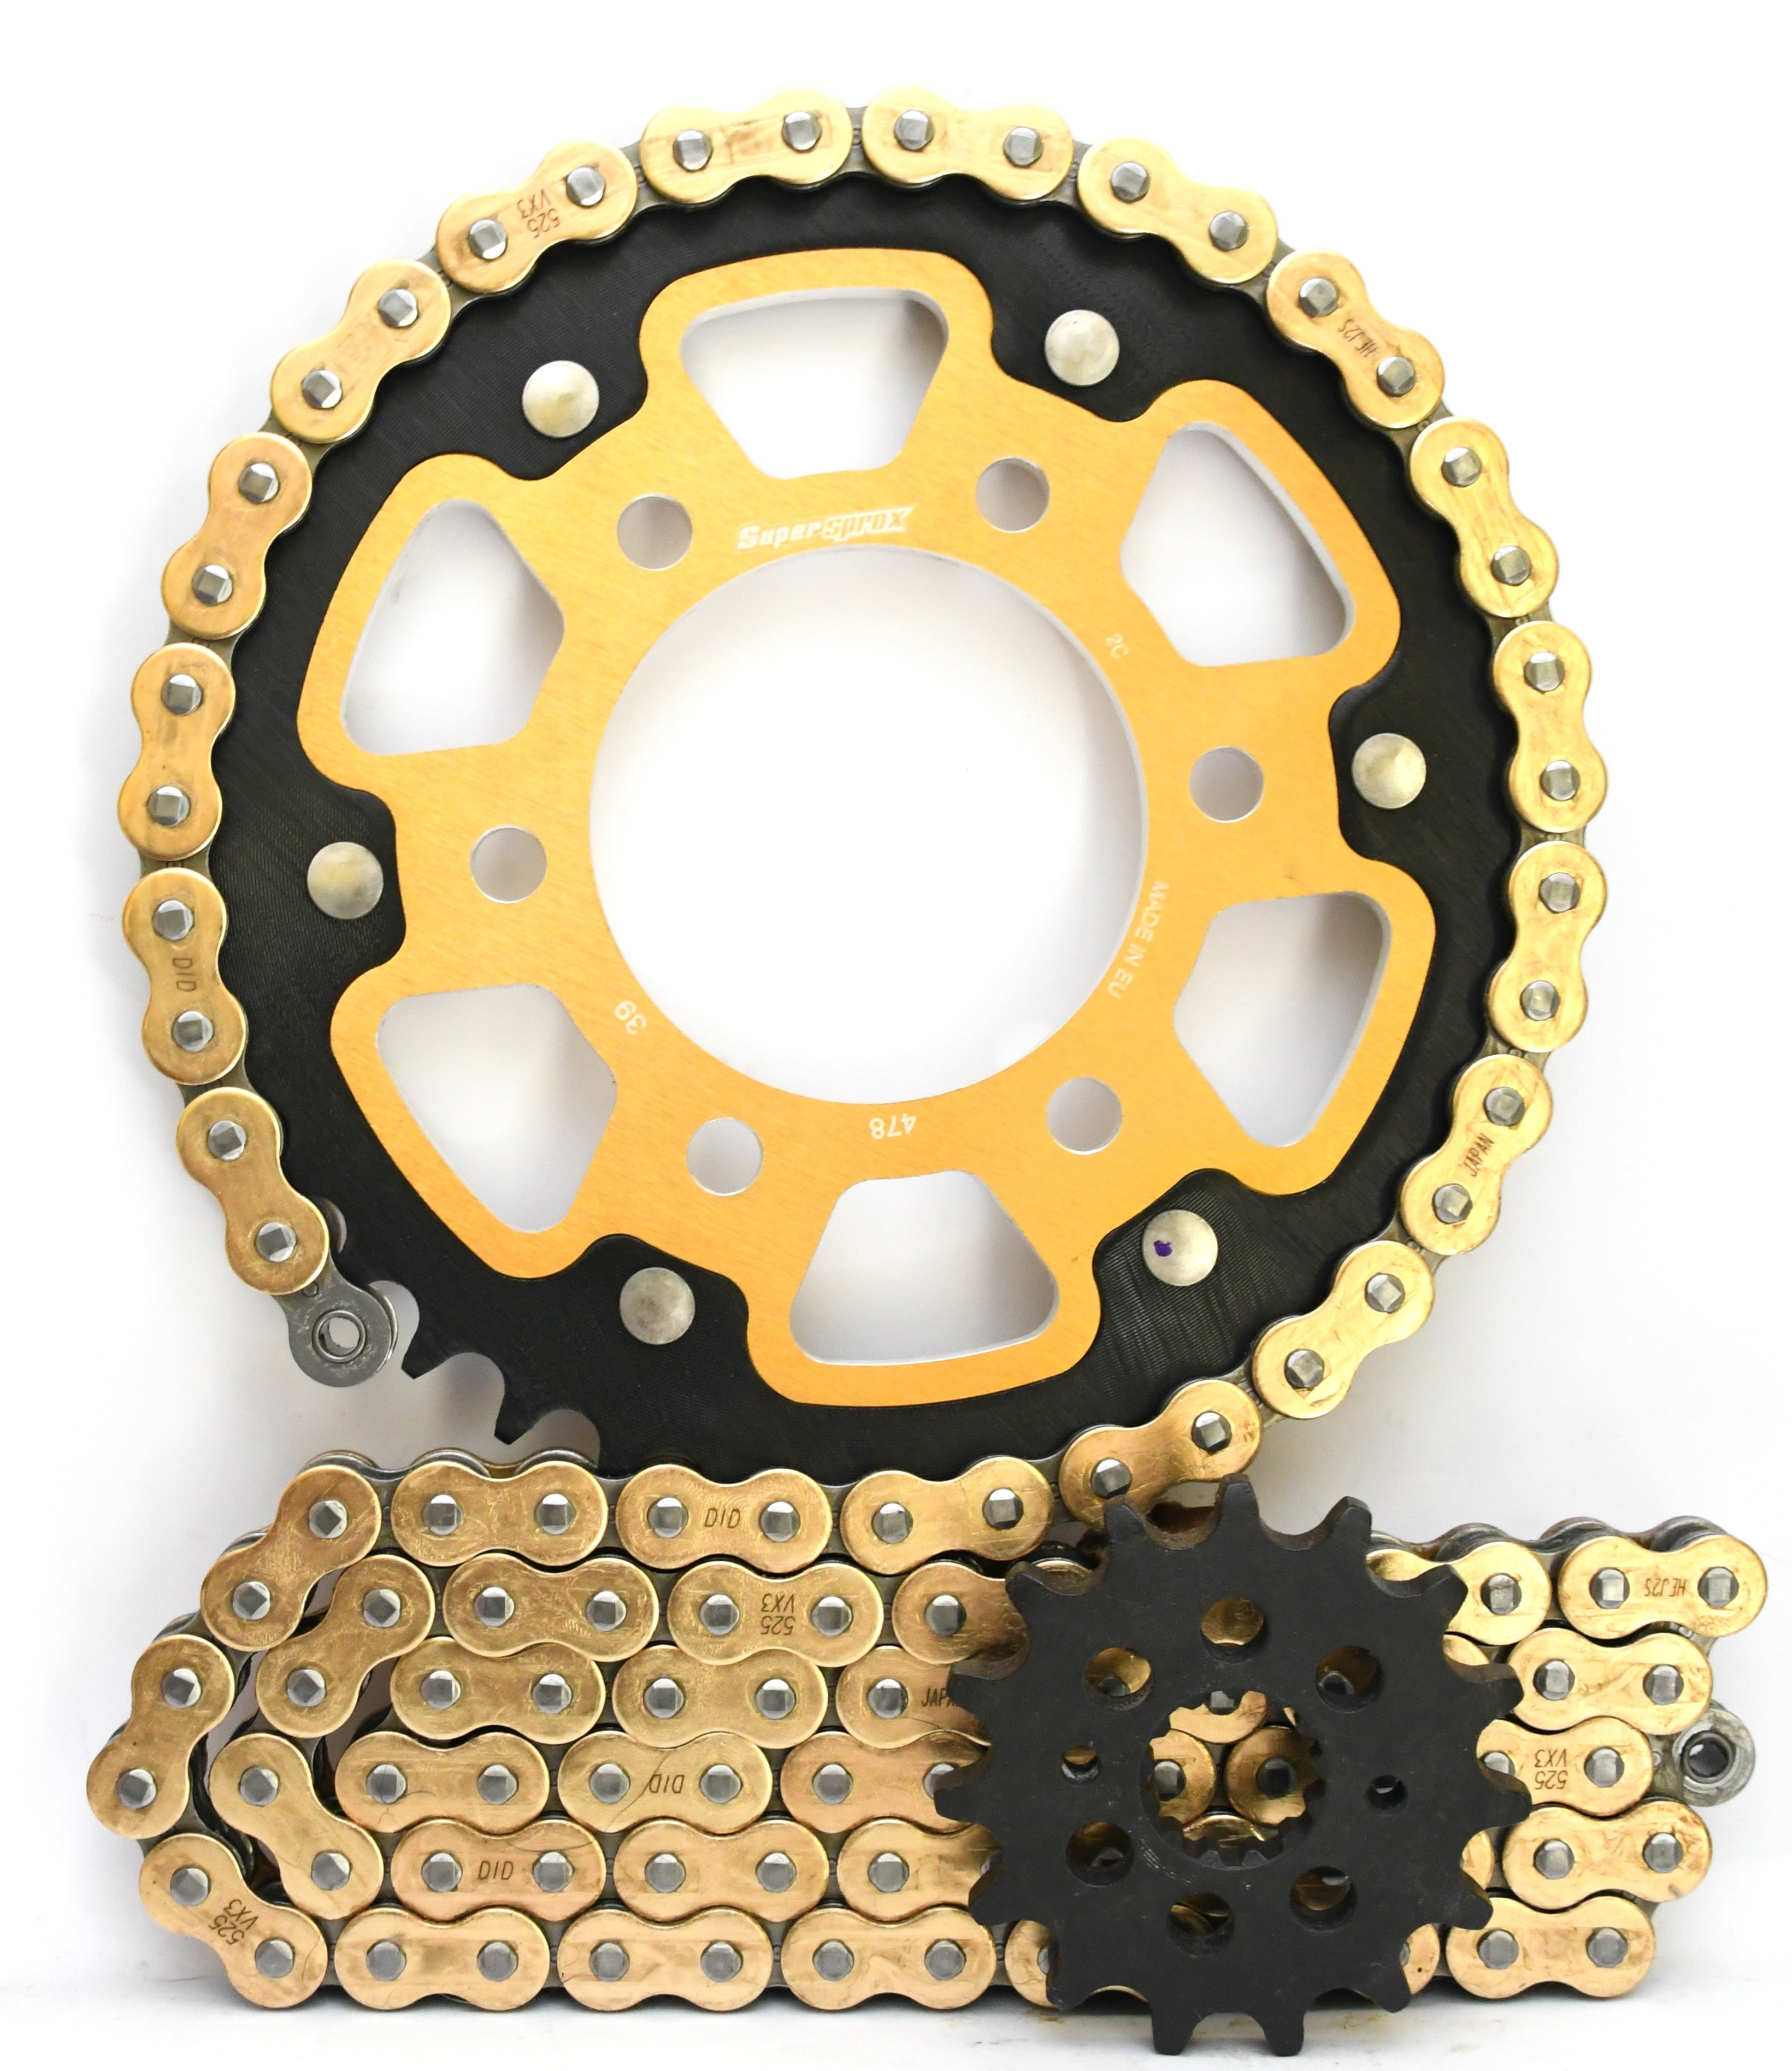 Supersprox Stealth and DID Chain & Sprocket Kit for Kawasaki Z800 2013-2016 - Standard Gearing